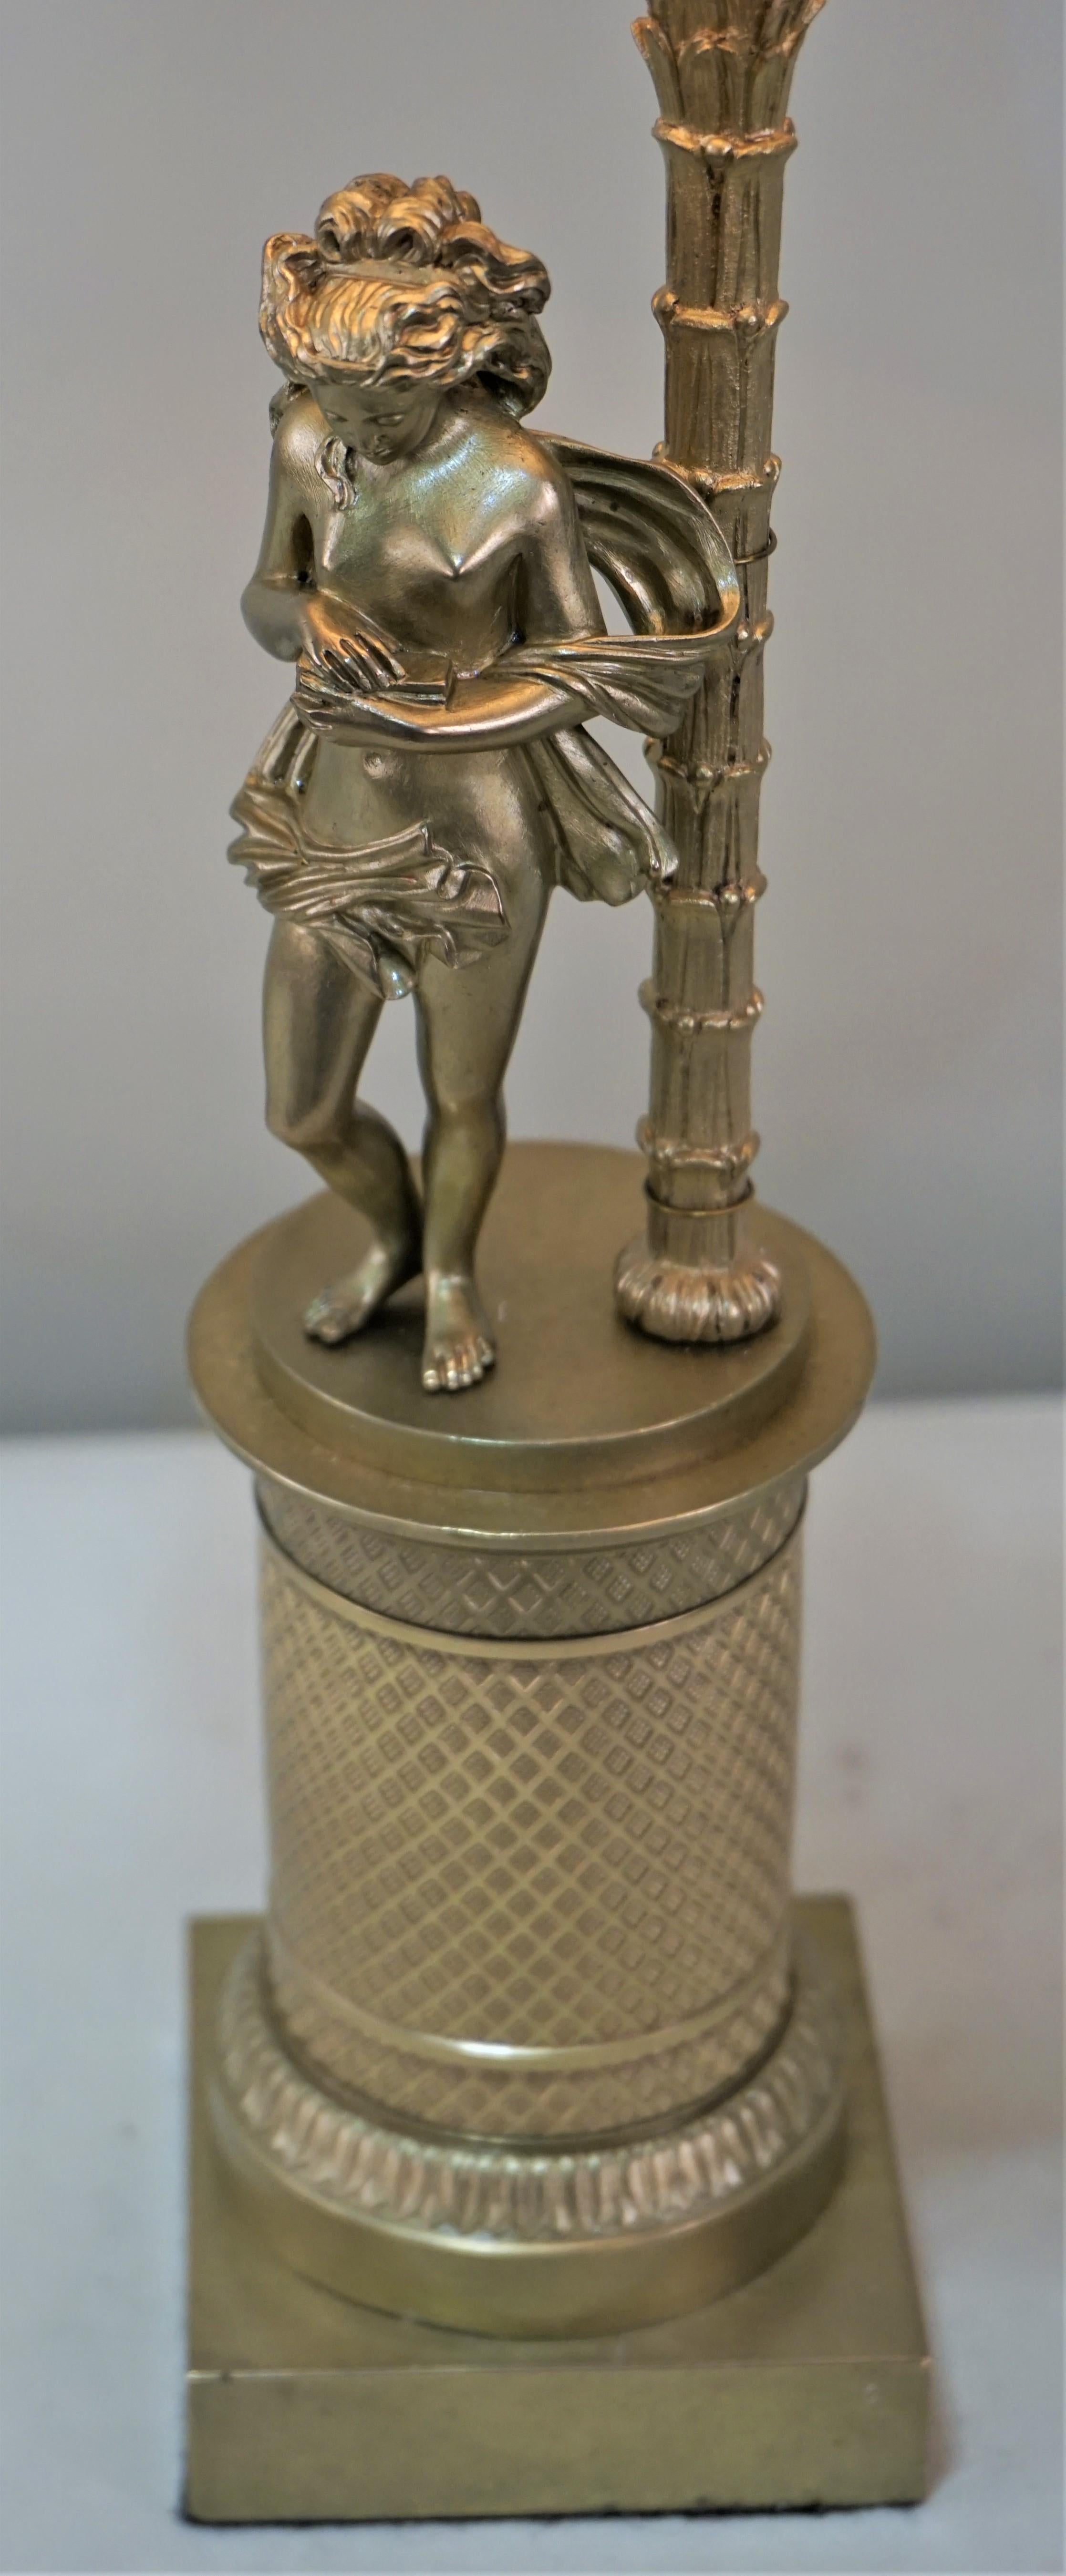 A petite lamp is customized from a 19th century bronze sculpture.